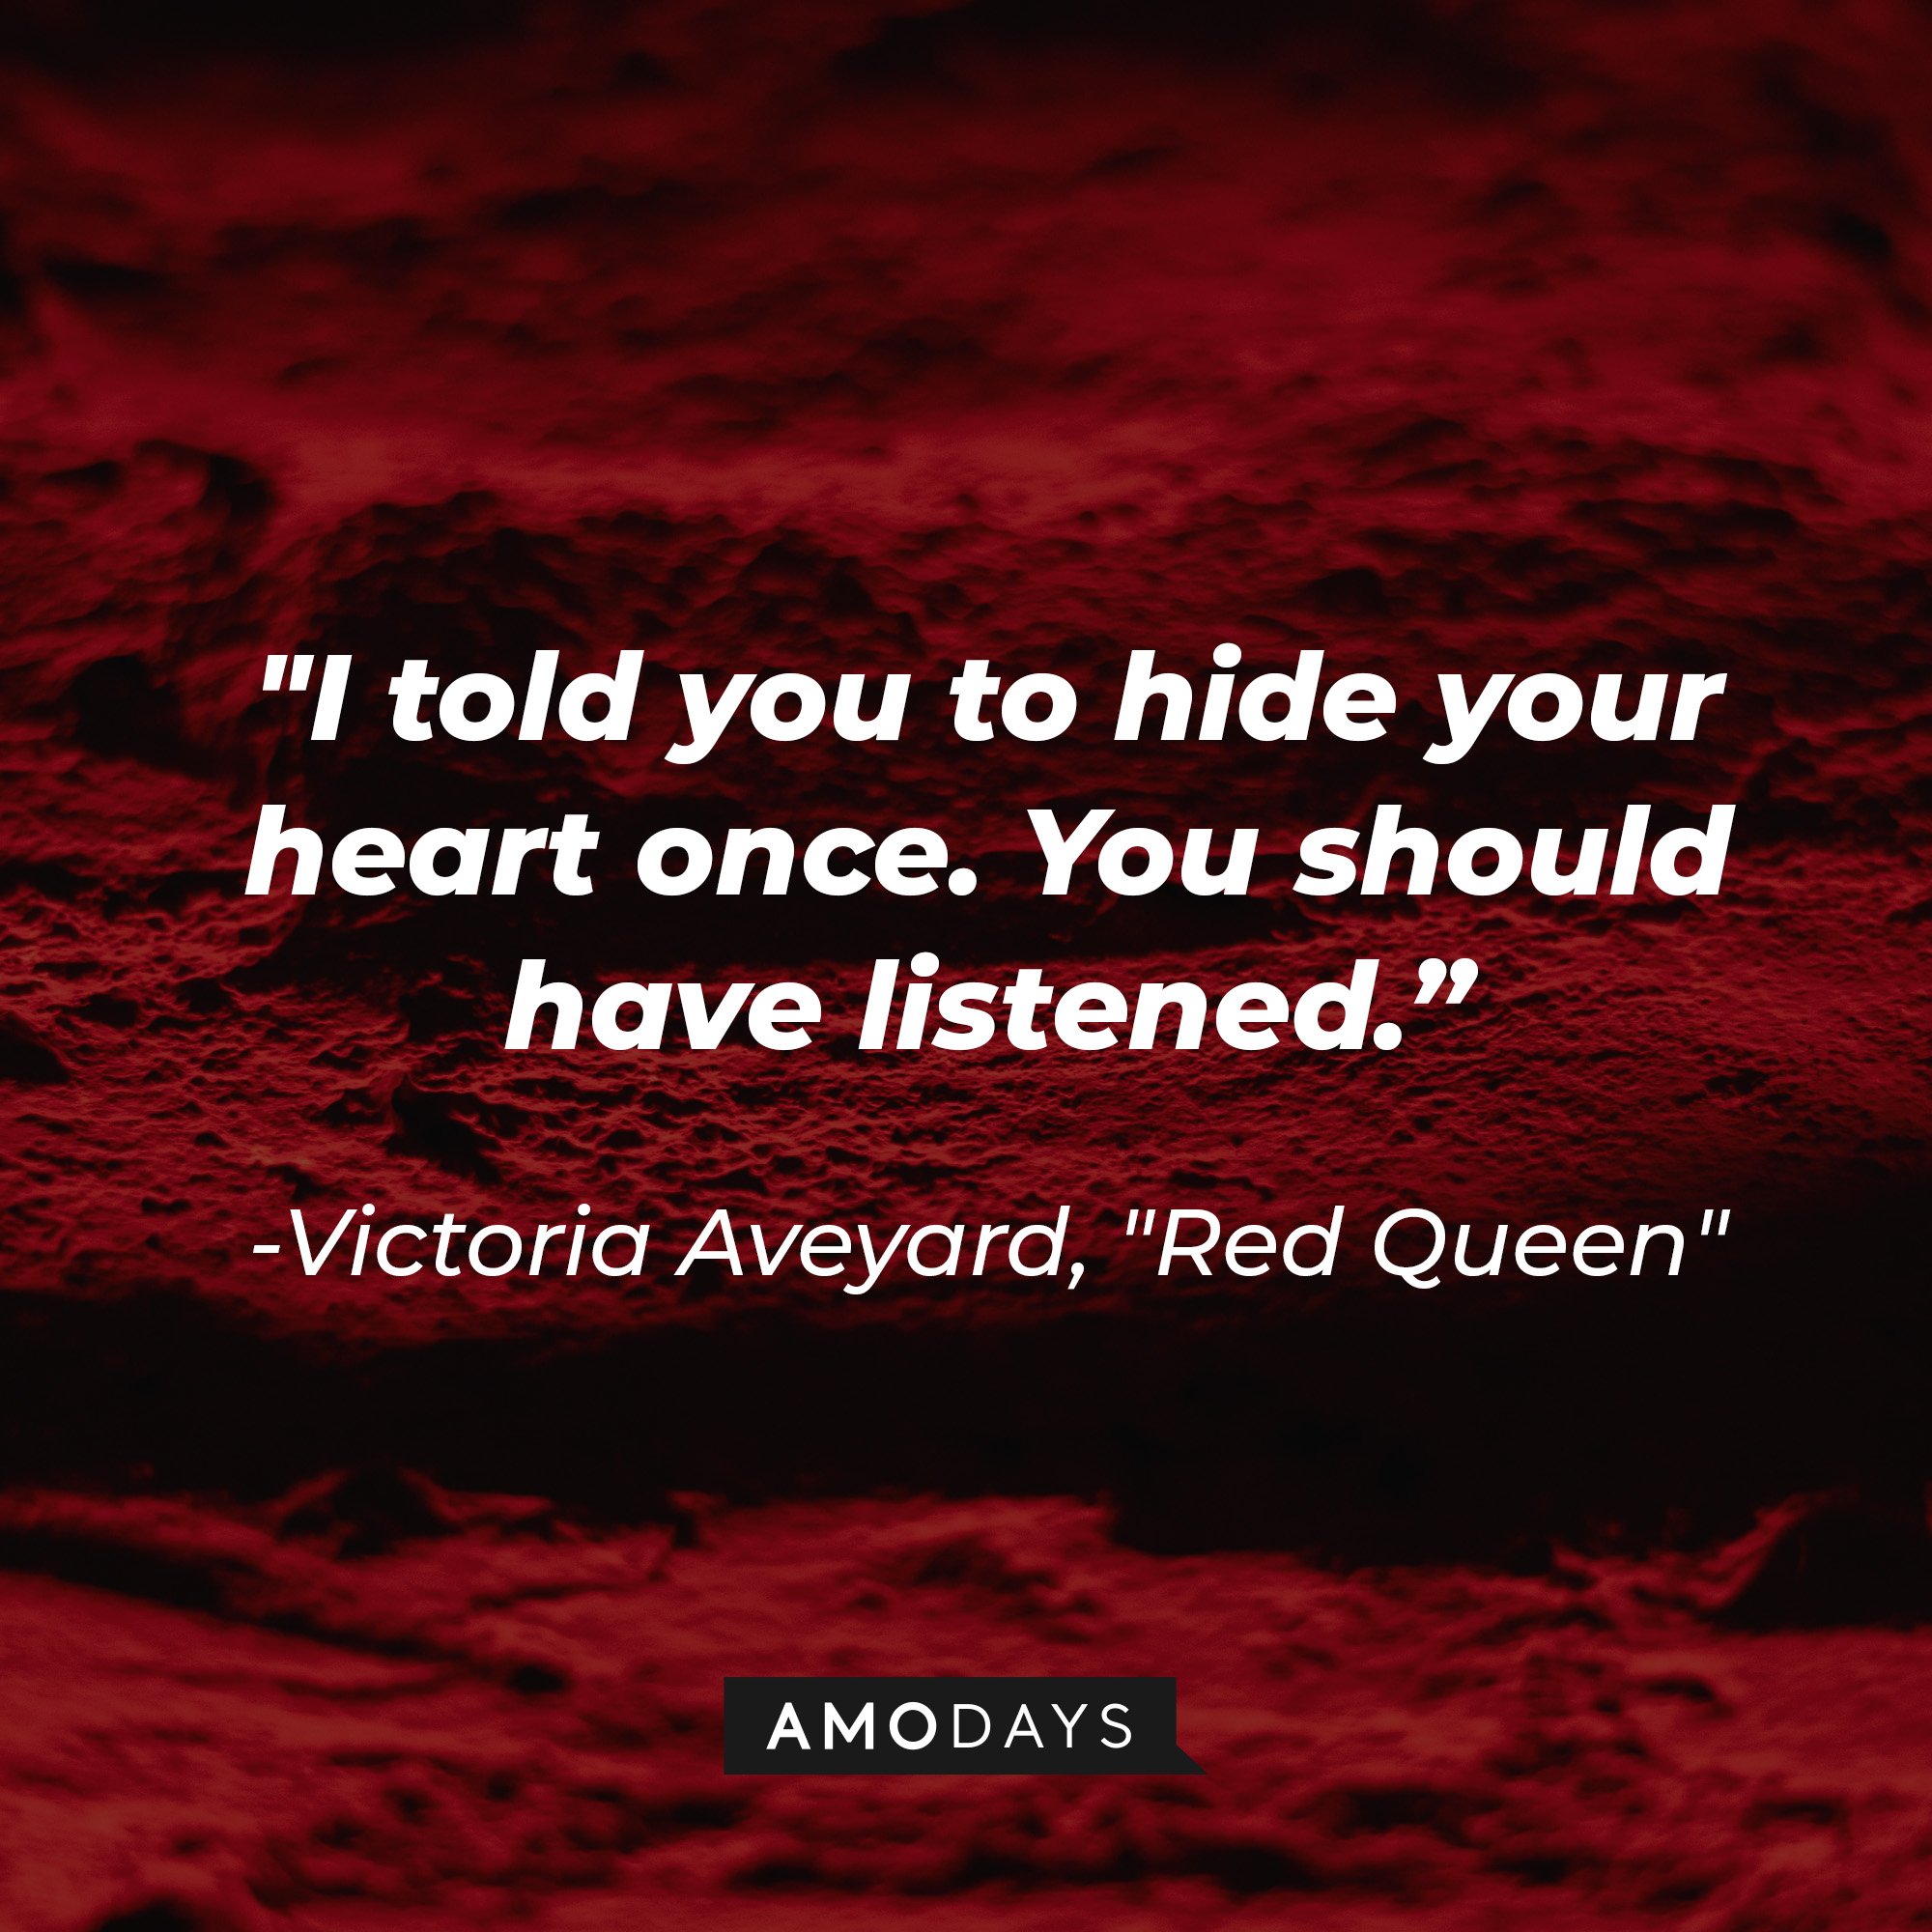  Victoria Aveyard’s quote in “Red Queen”: "I told you to hide your heart once. You should have listened." | Image: AmoDays